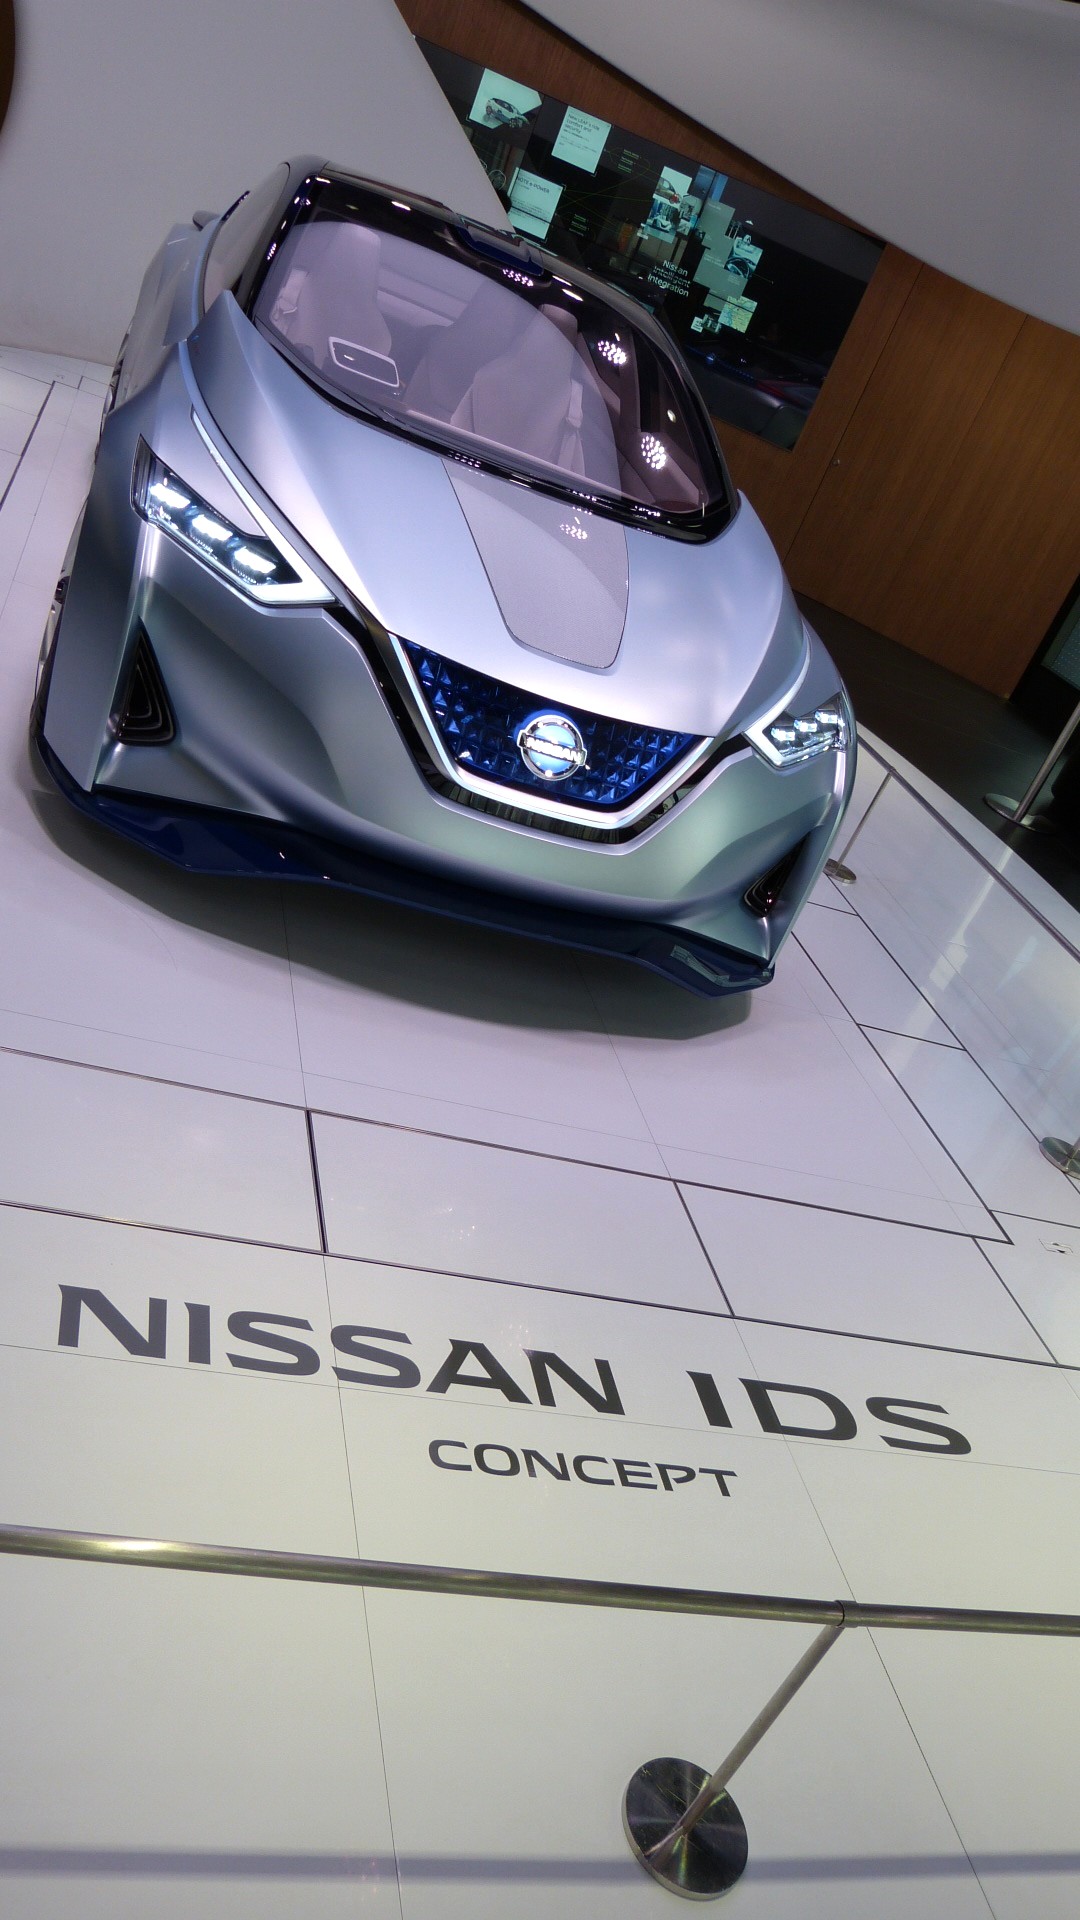 Nissan IDS concept in purple